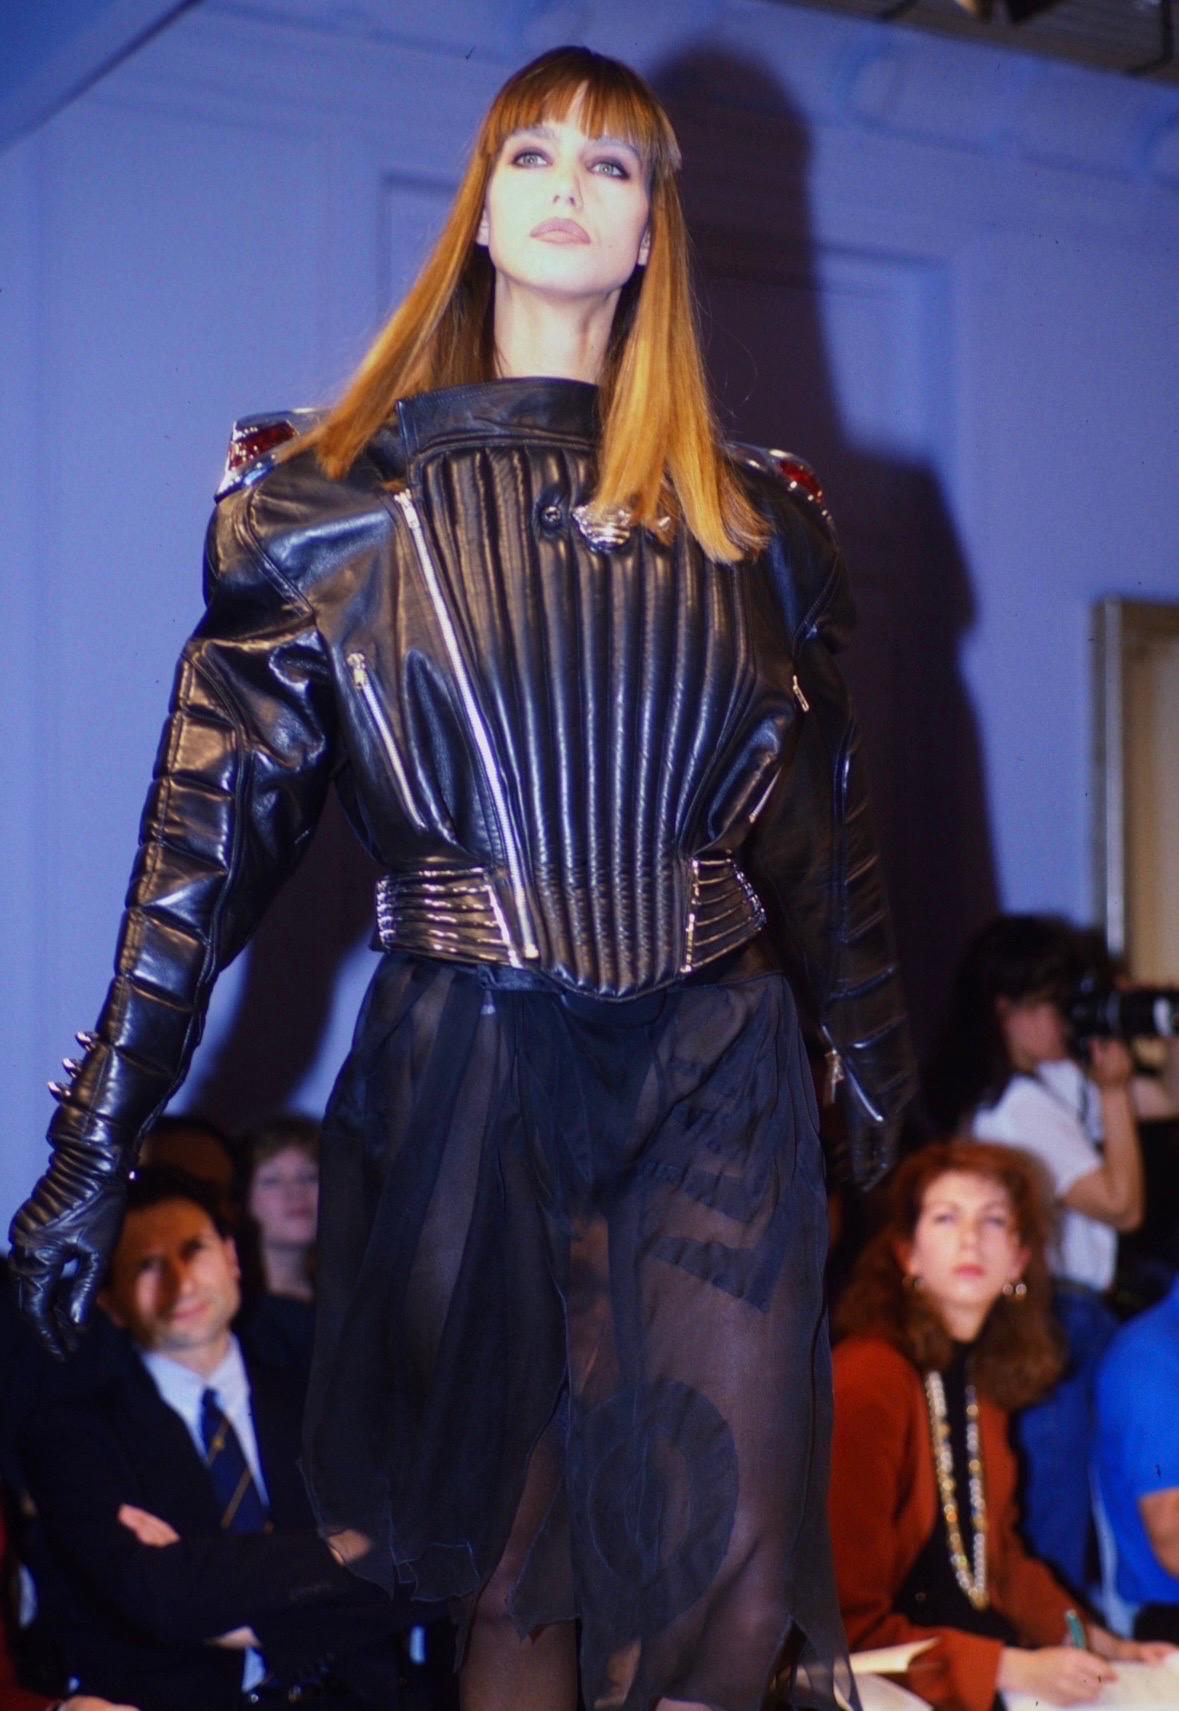 Presenting a major black leather Thierry Mugler biker motorcycle style jacket, designed by Manfred Mugler. From his Fall/Winter 1989 'Hiver Buick' collection, versions of this vintage eye-catching jacket debuted on the season's runway, on Roberta